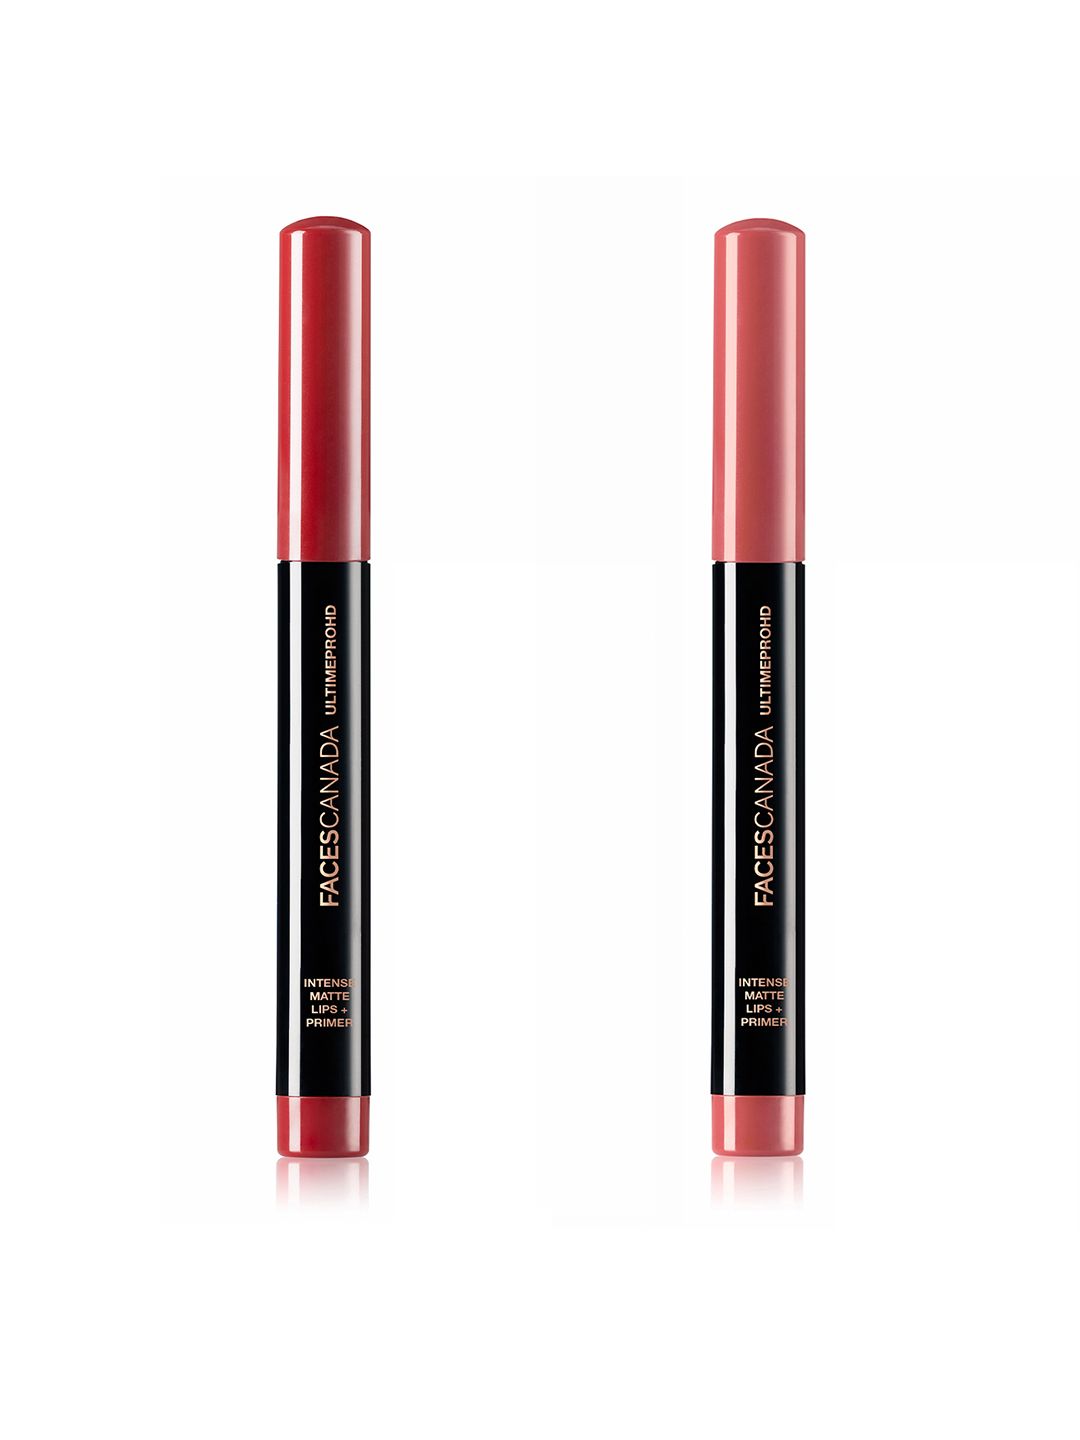 FACES CANADA Set of 2 Ultimepro Hd Intense Matte Lips + Primer Lipstick Price in India